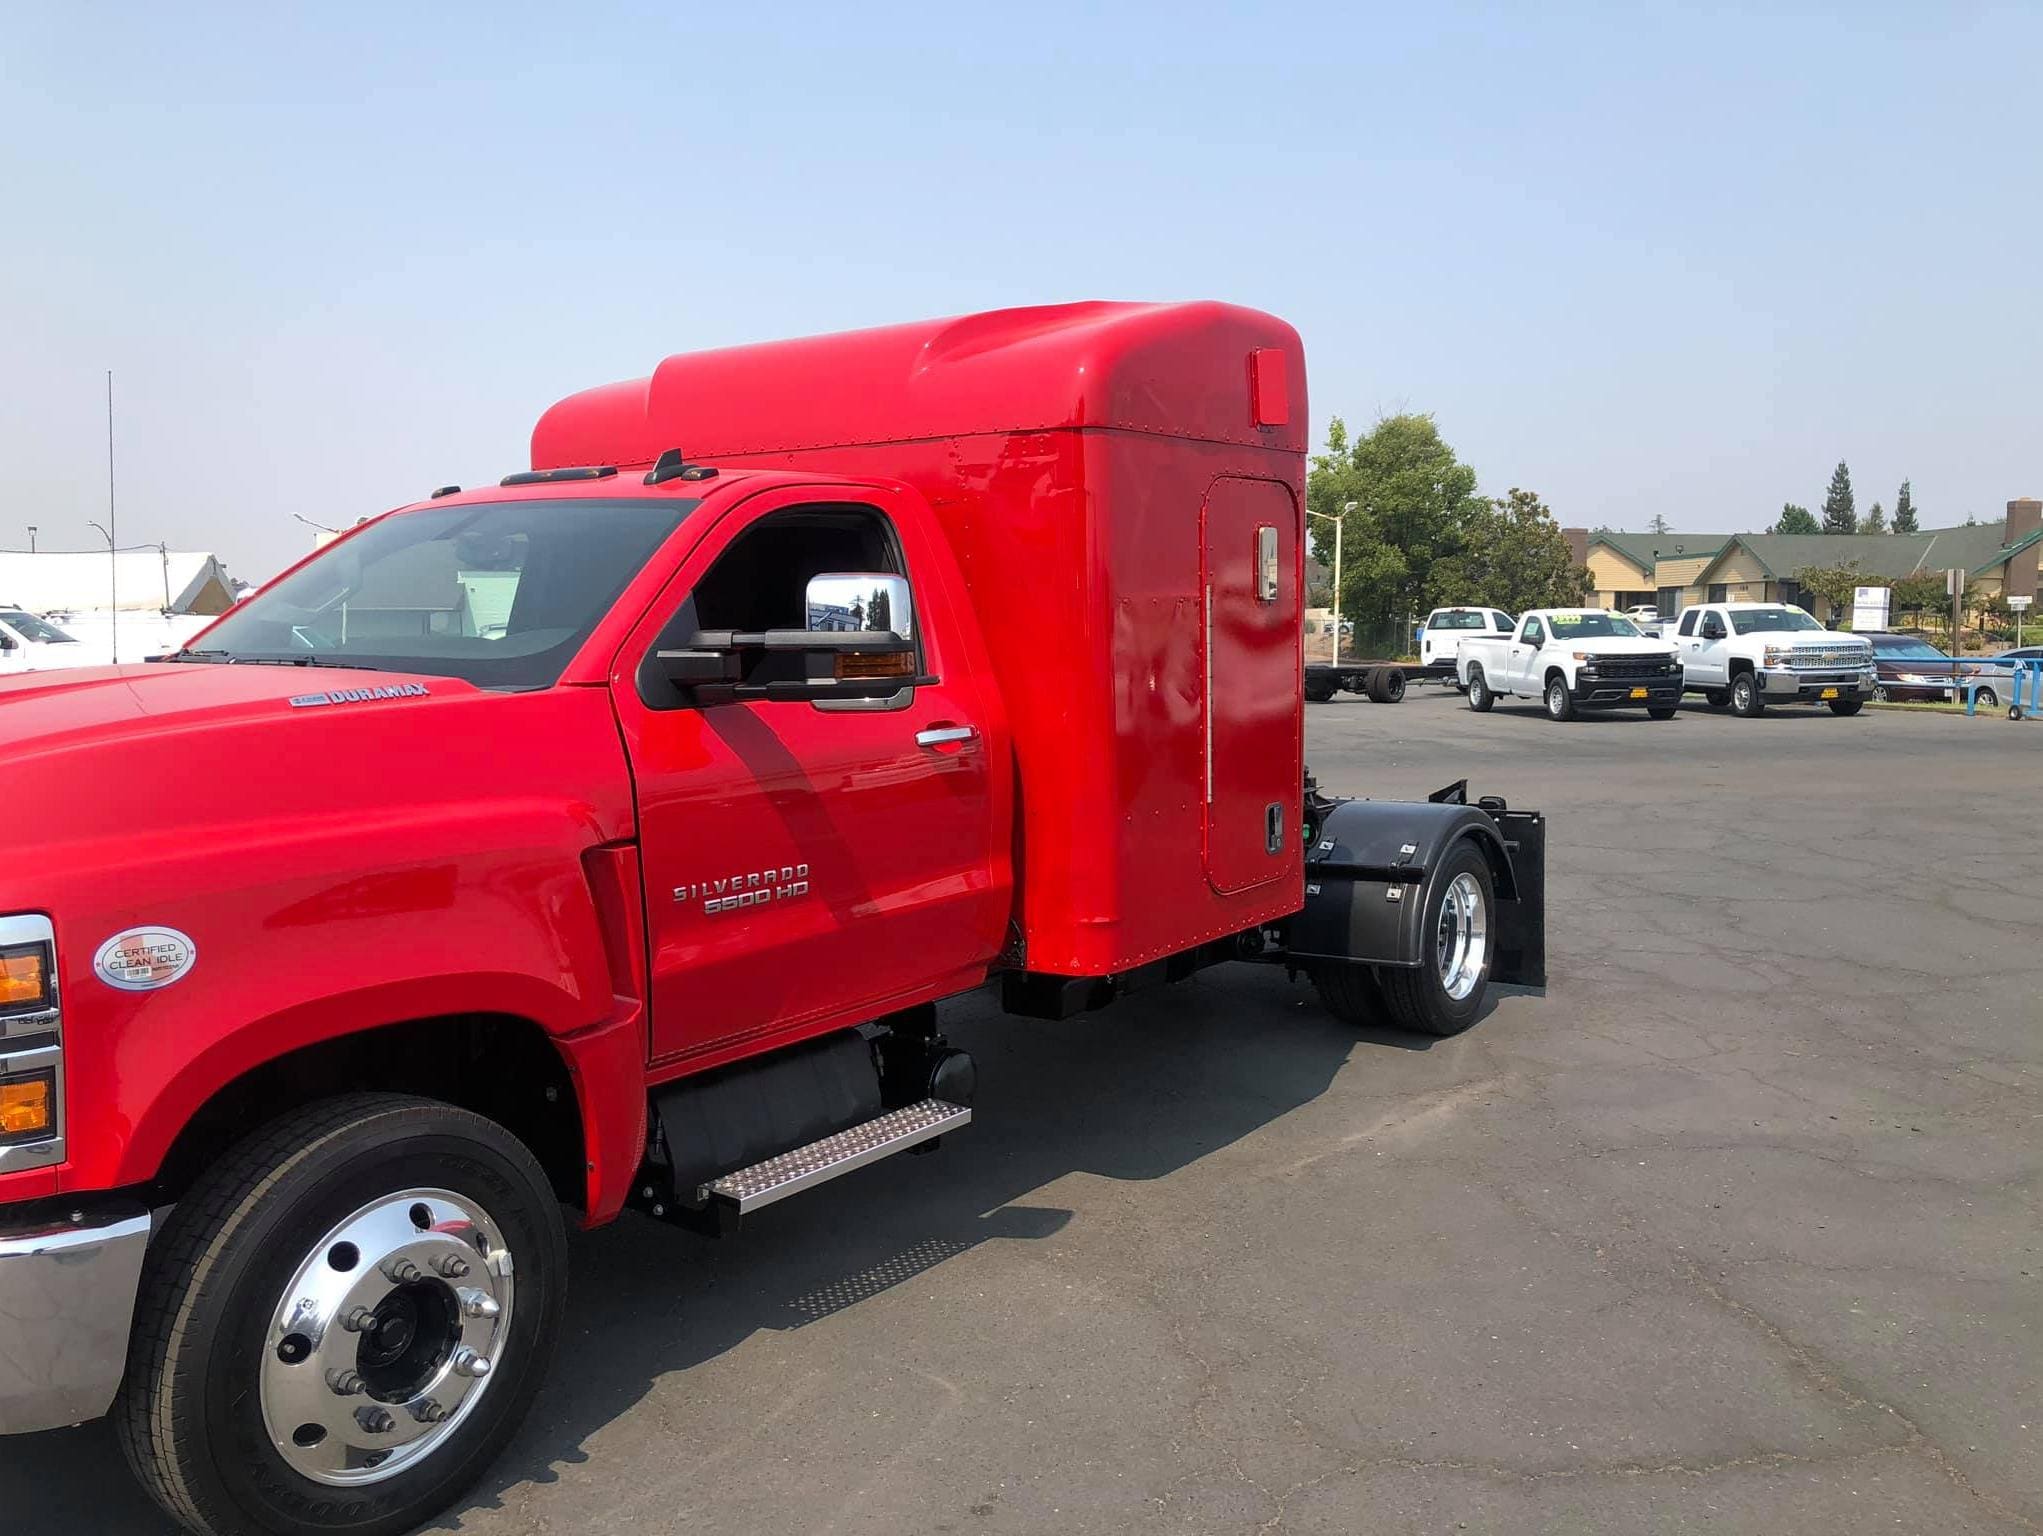 Front view of a red Chevy Silverado 5500HD with camper and hauler body